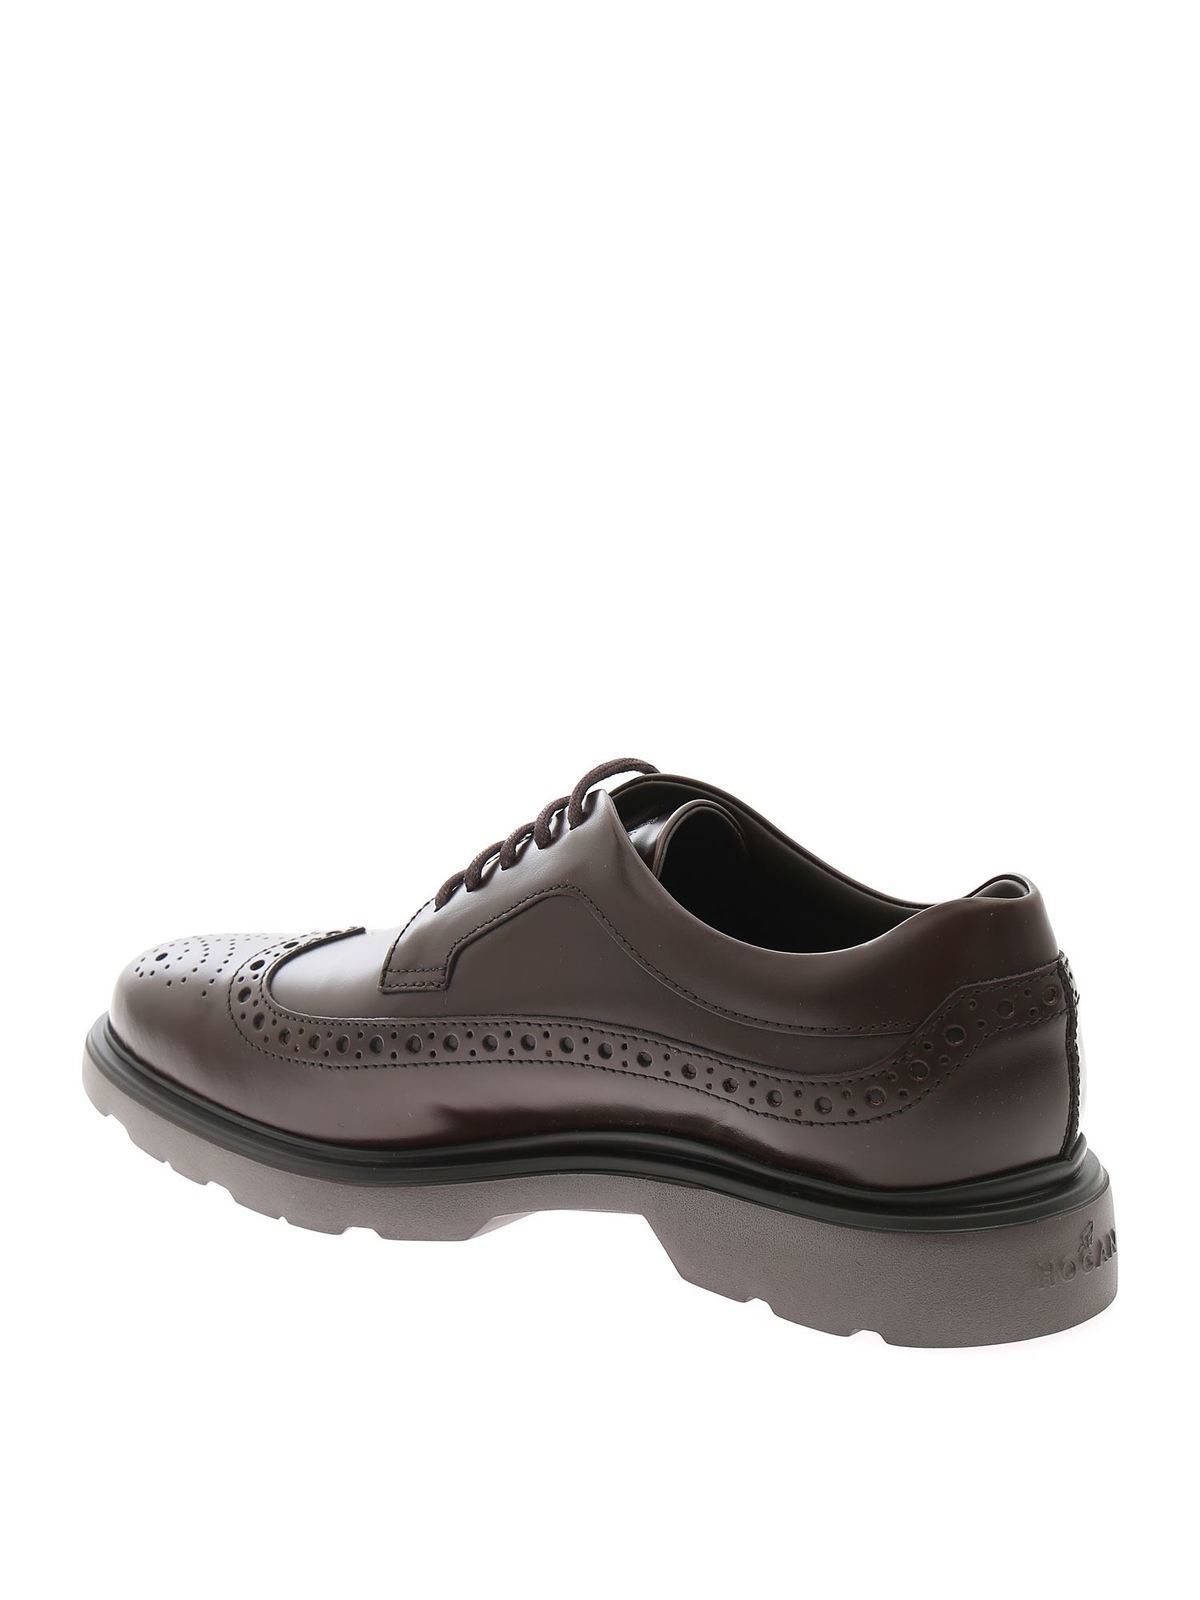 Classic shoes Hogan - H393 derby shoes in brown - HXM3930BX607J7S801